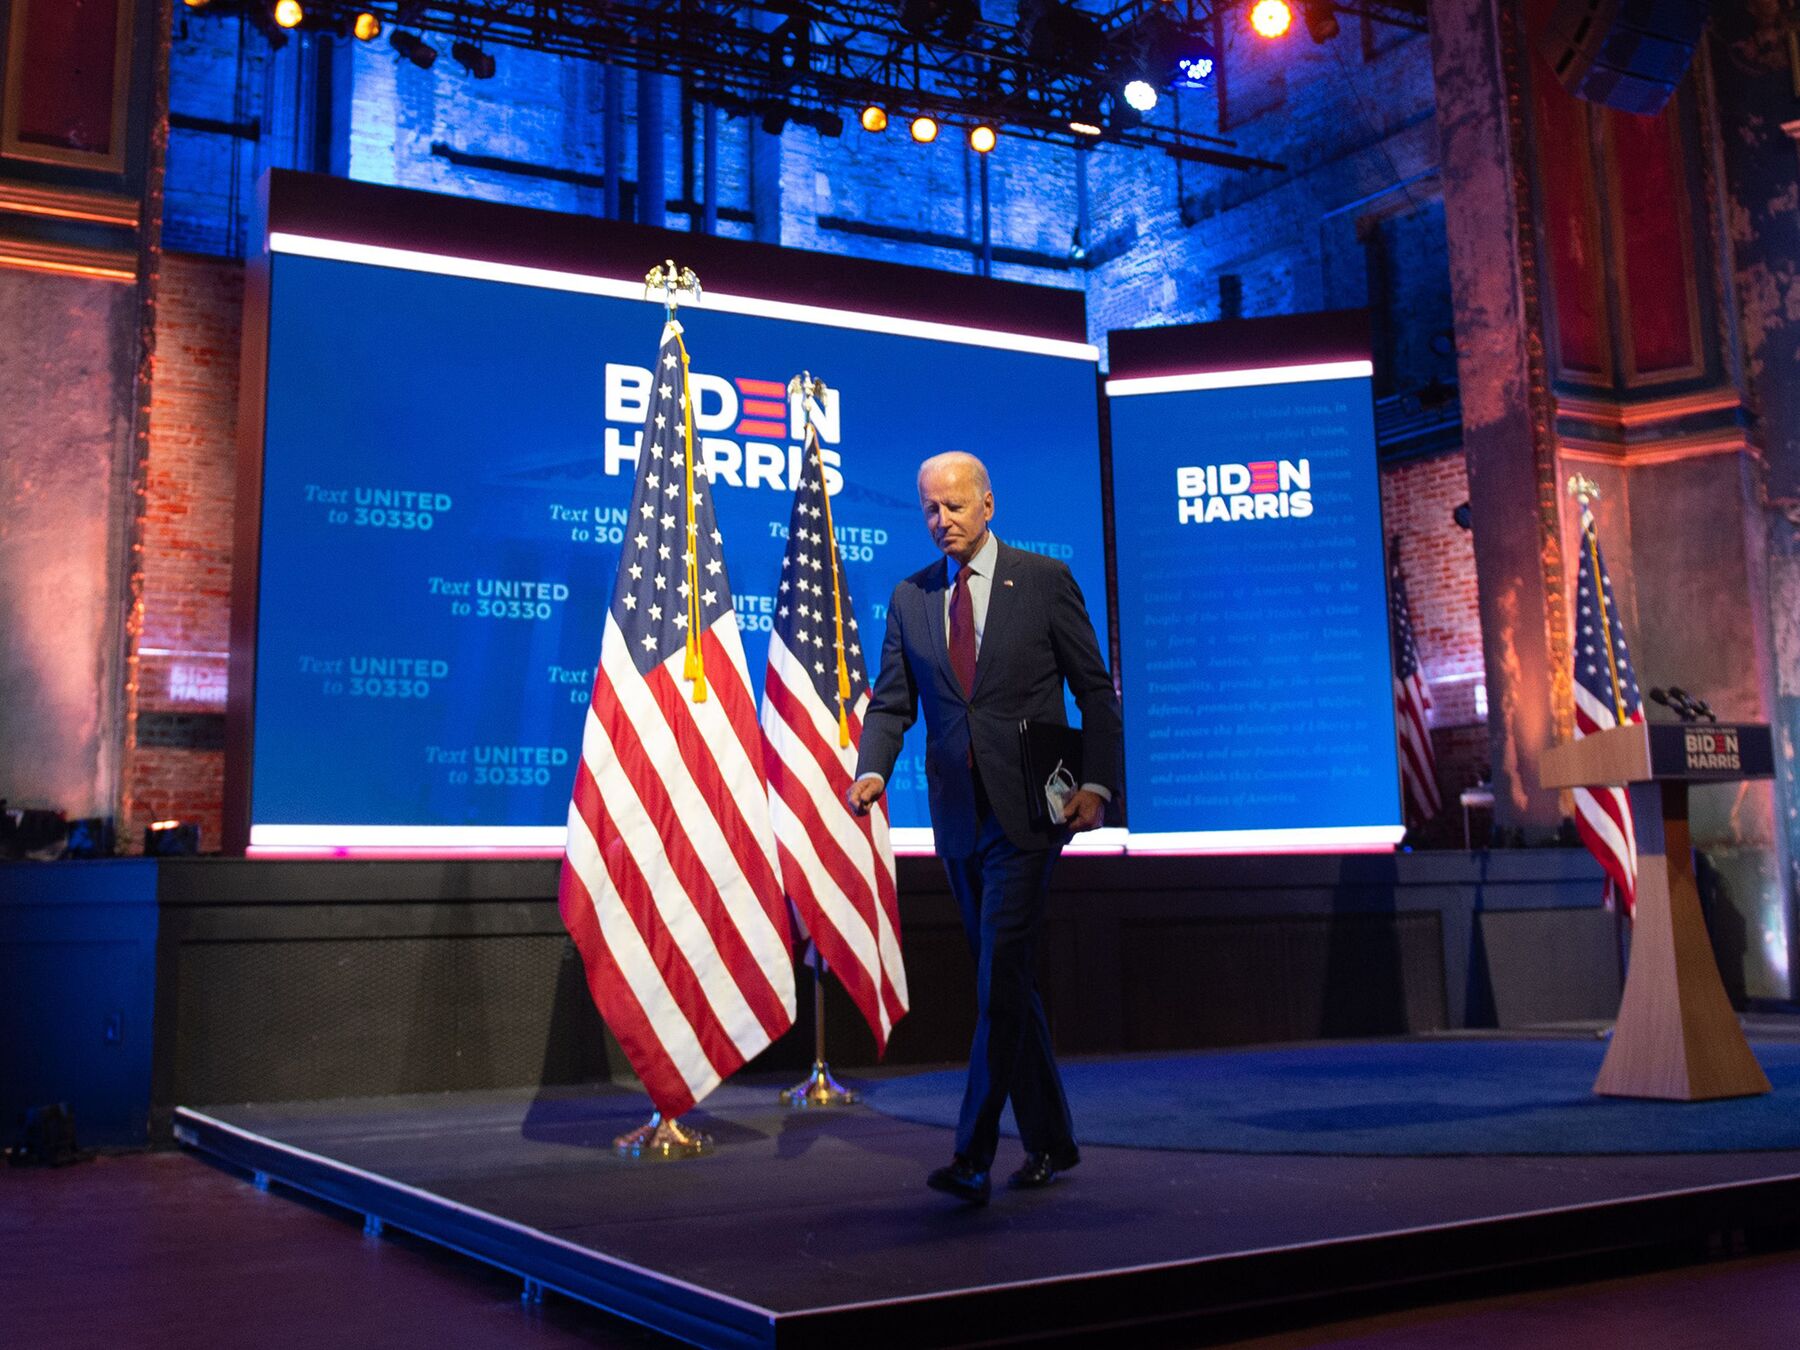 Joe Biden leaves the stage after speaking at a local theater in Wilmington, Delaware on September 27, 2020.